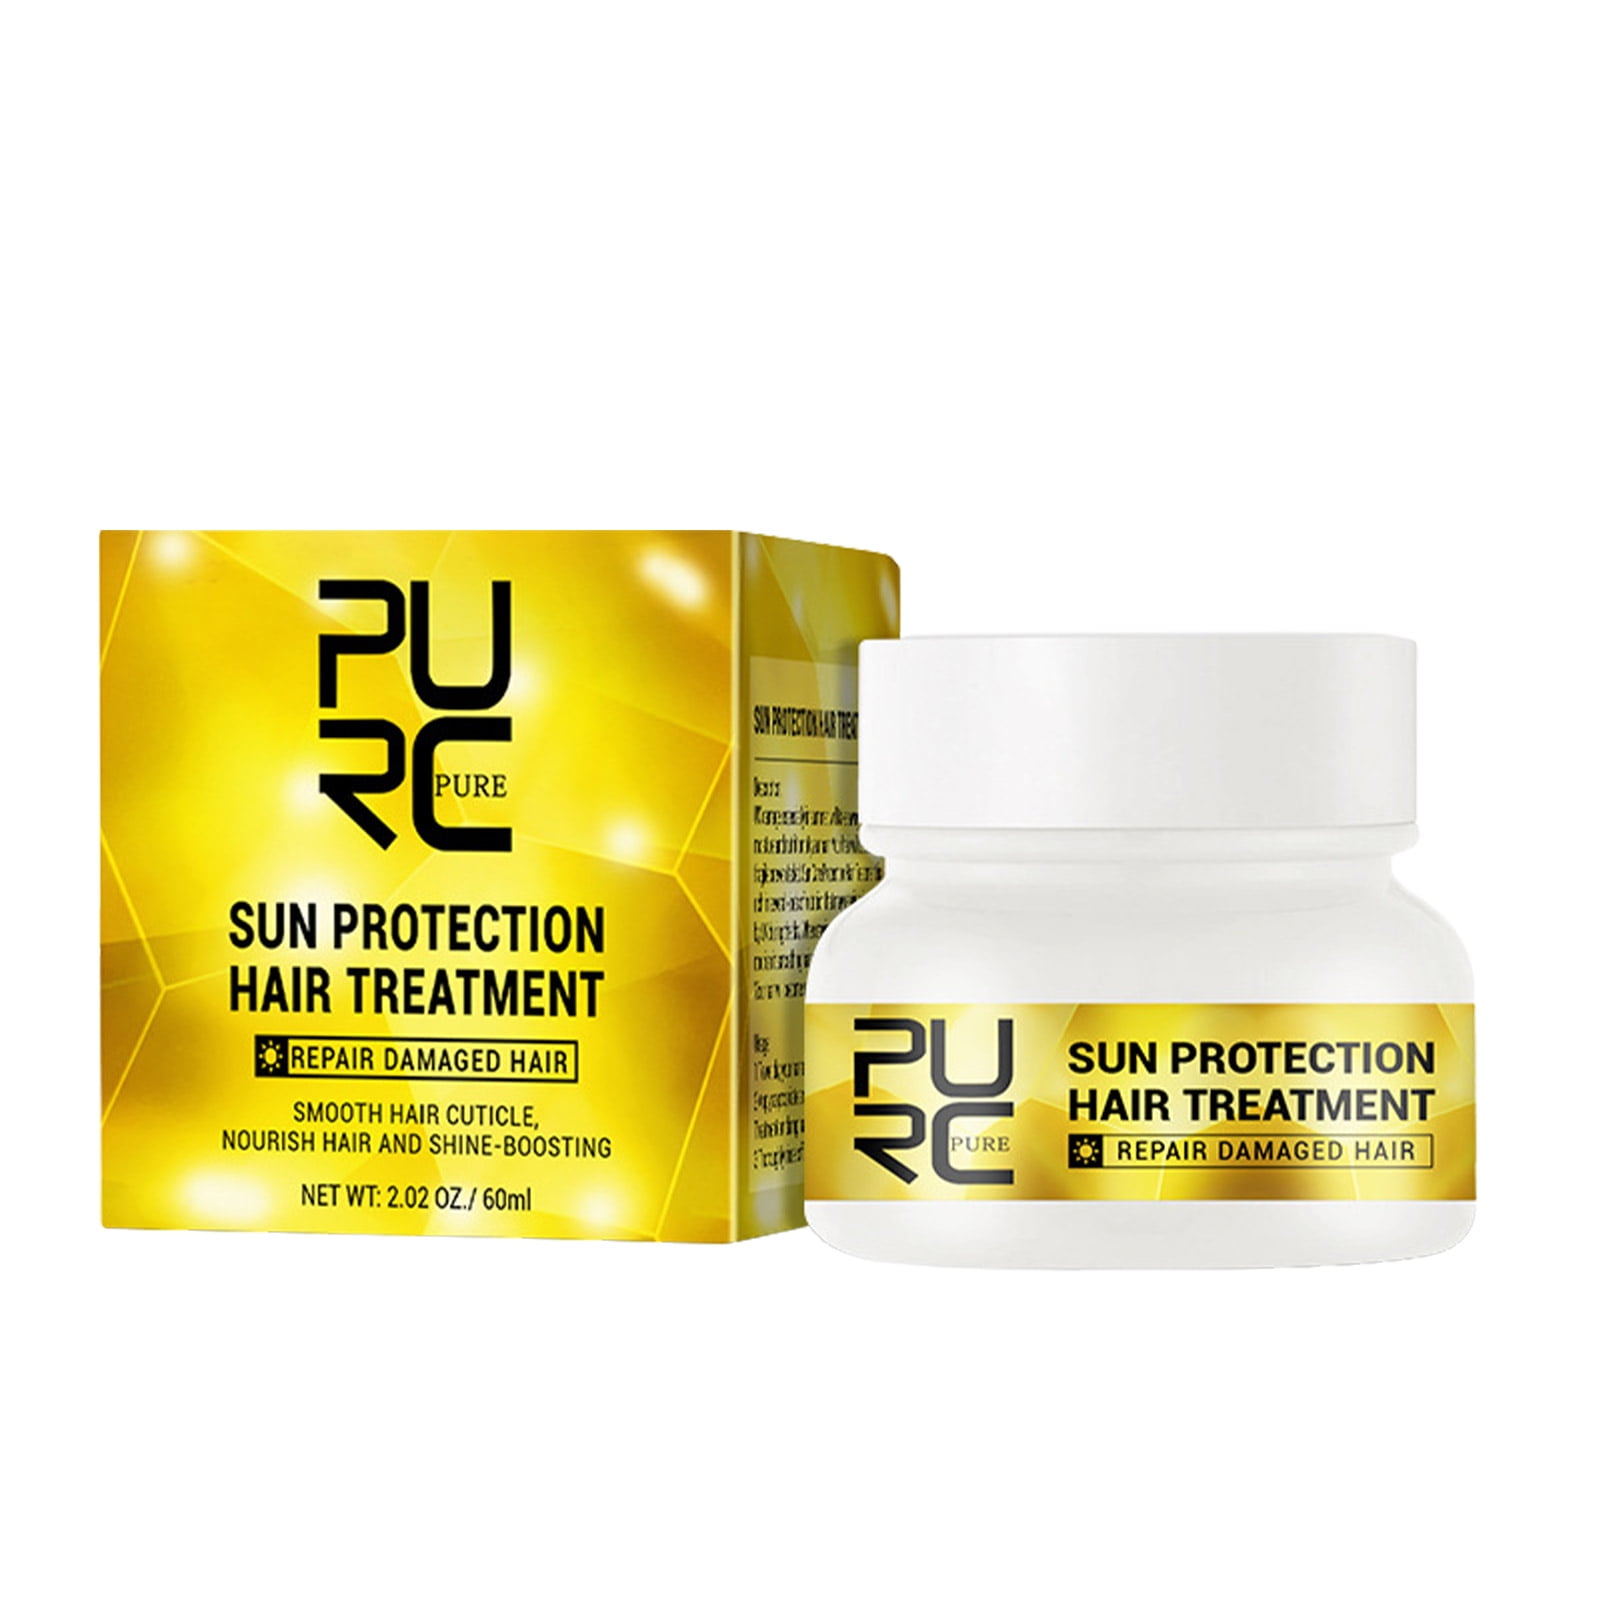 Younar Hair Masque | Deep Conditioner for Sun Protection Repairs Damaged |  Intensive Hydration Hair Masque for Dry, Damaged Hair 